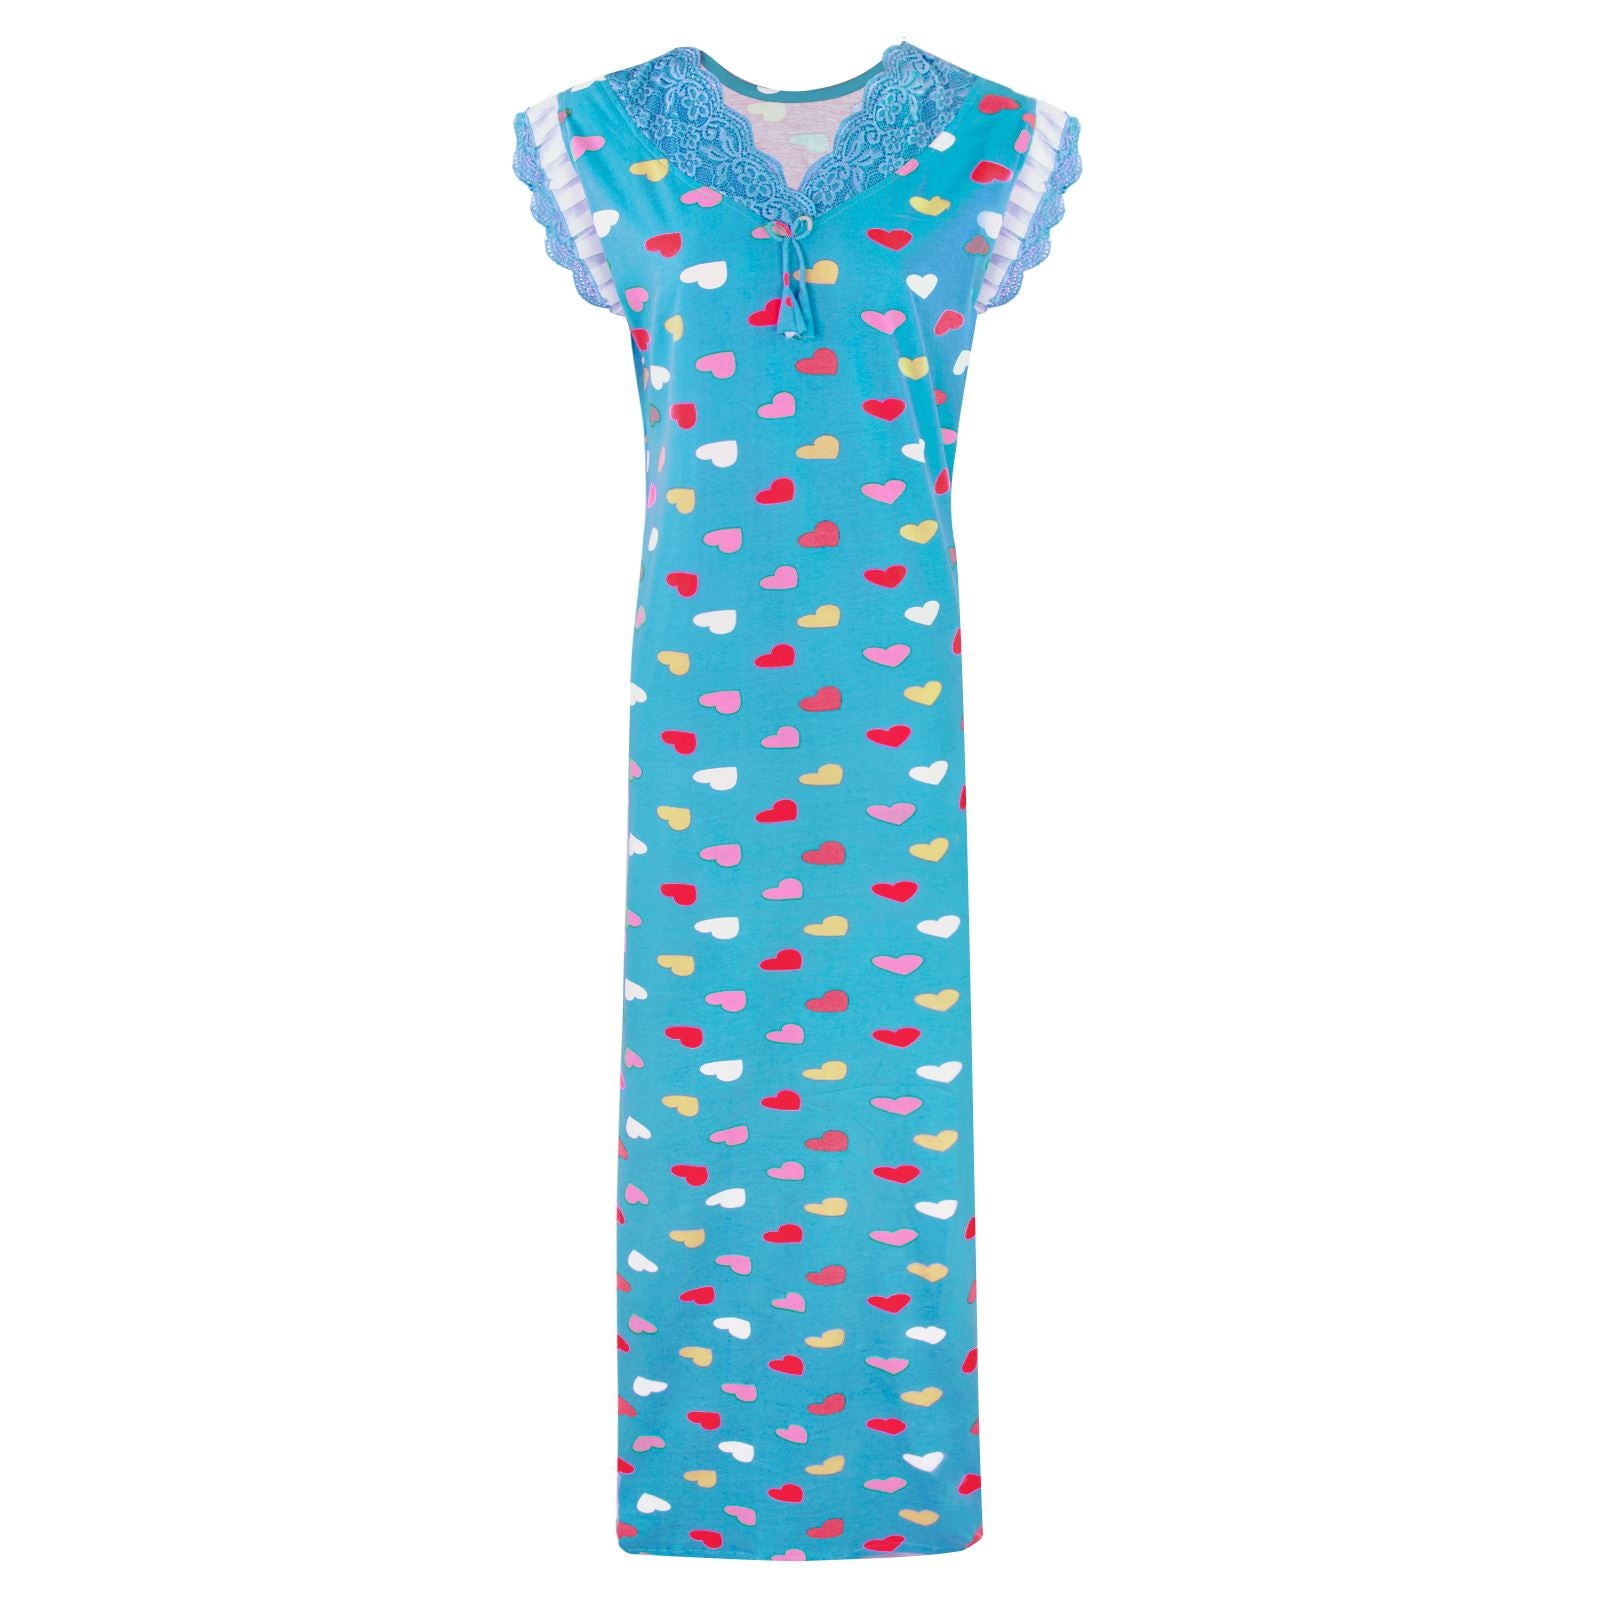 Teal / One Size Women Heart Print Stretchable Cotton Nightie The Orange Tags